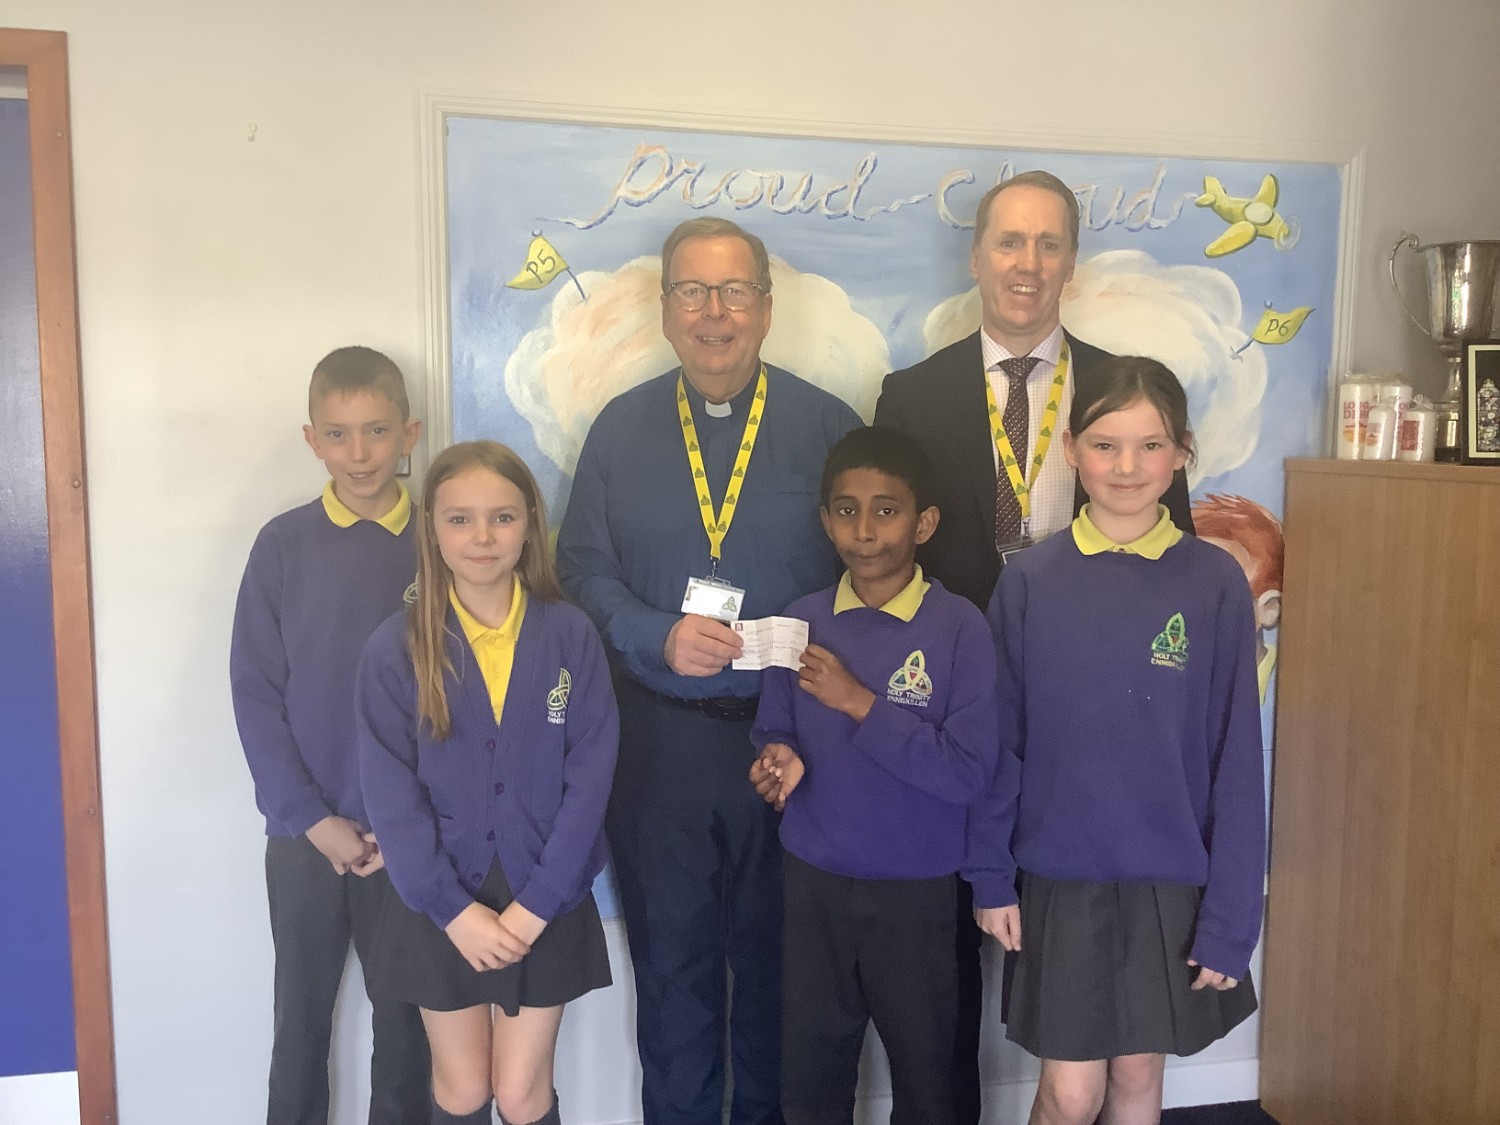 Mr Treacy and some of our KS2 pupils present Deacon Martin with a cheque for Trócaire.  The money was raised by classes accross our school during the run up to Easter.